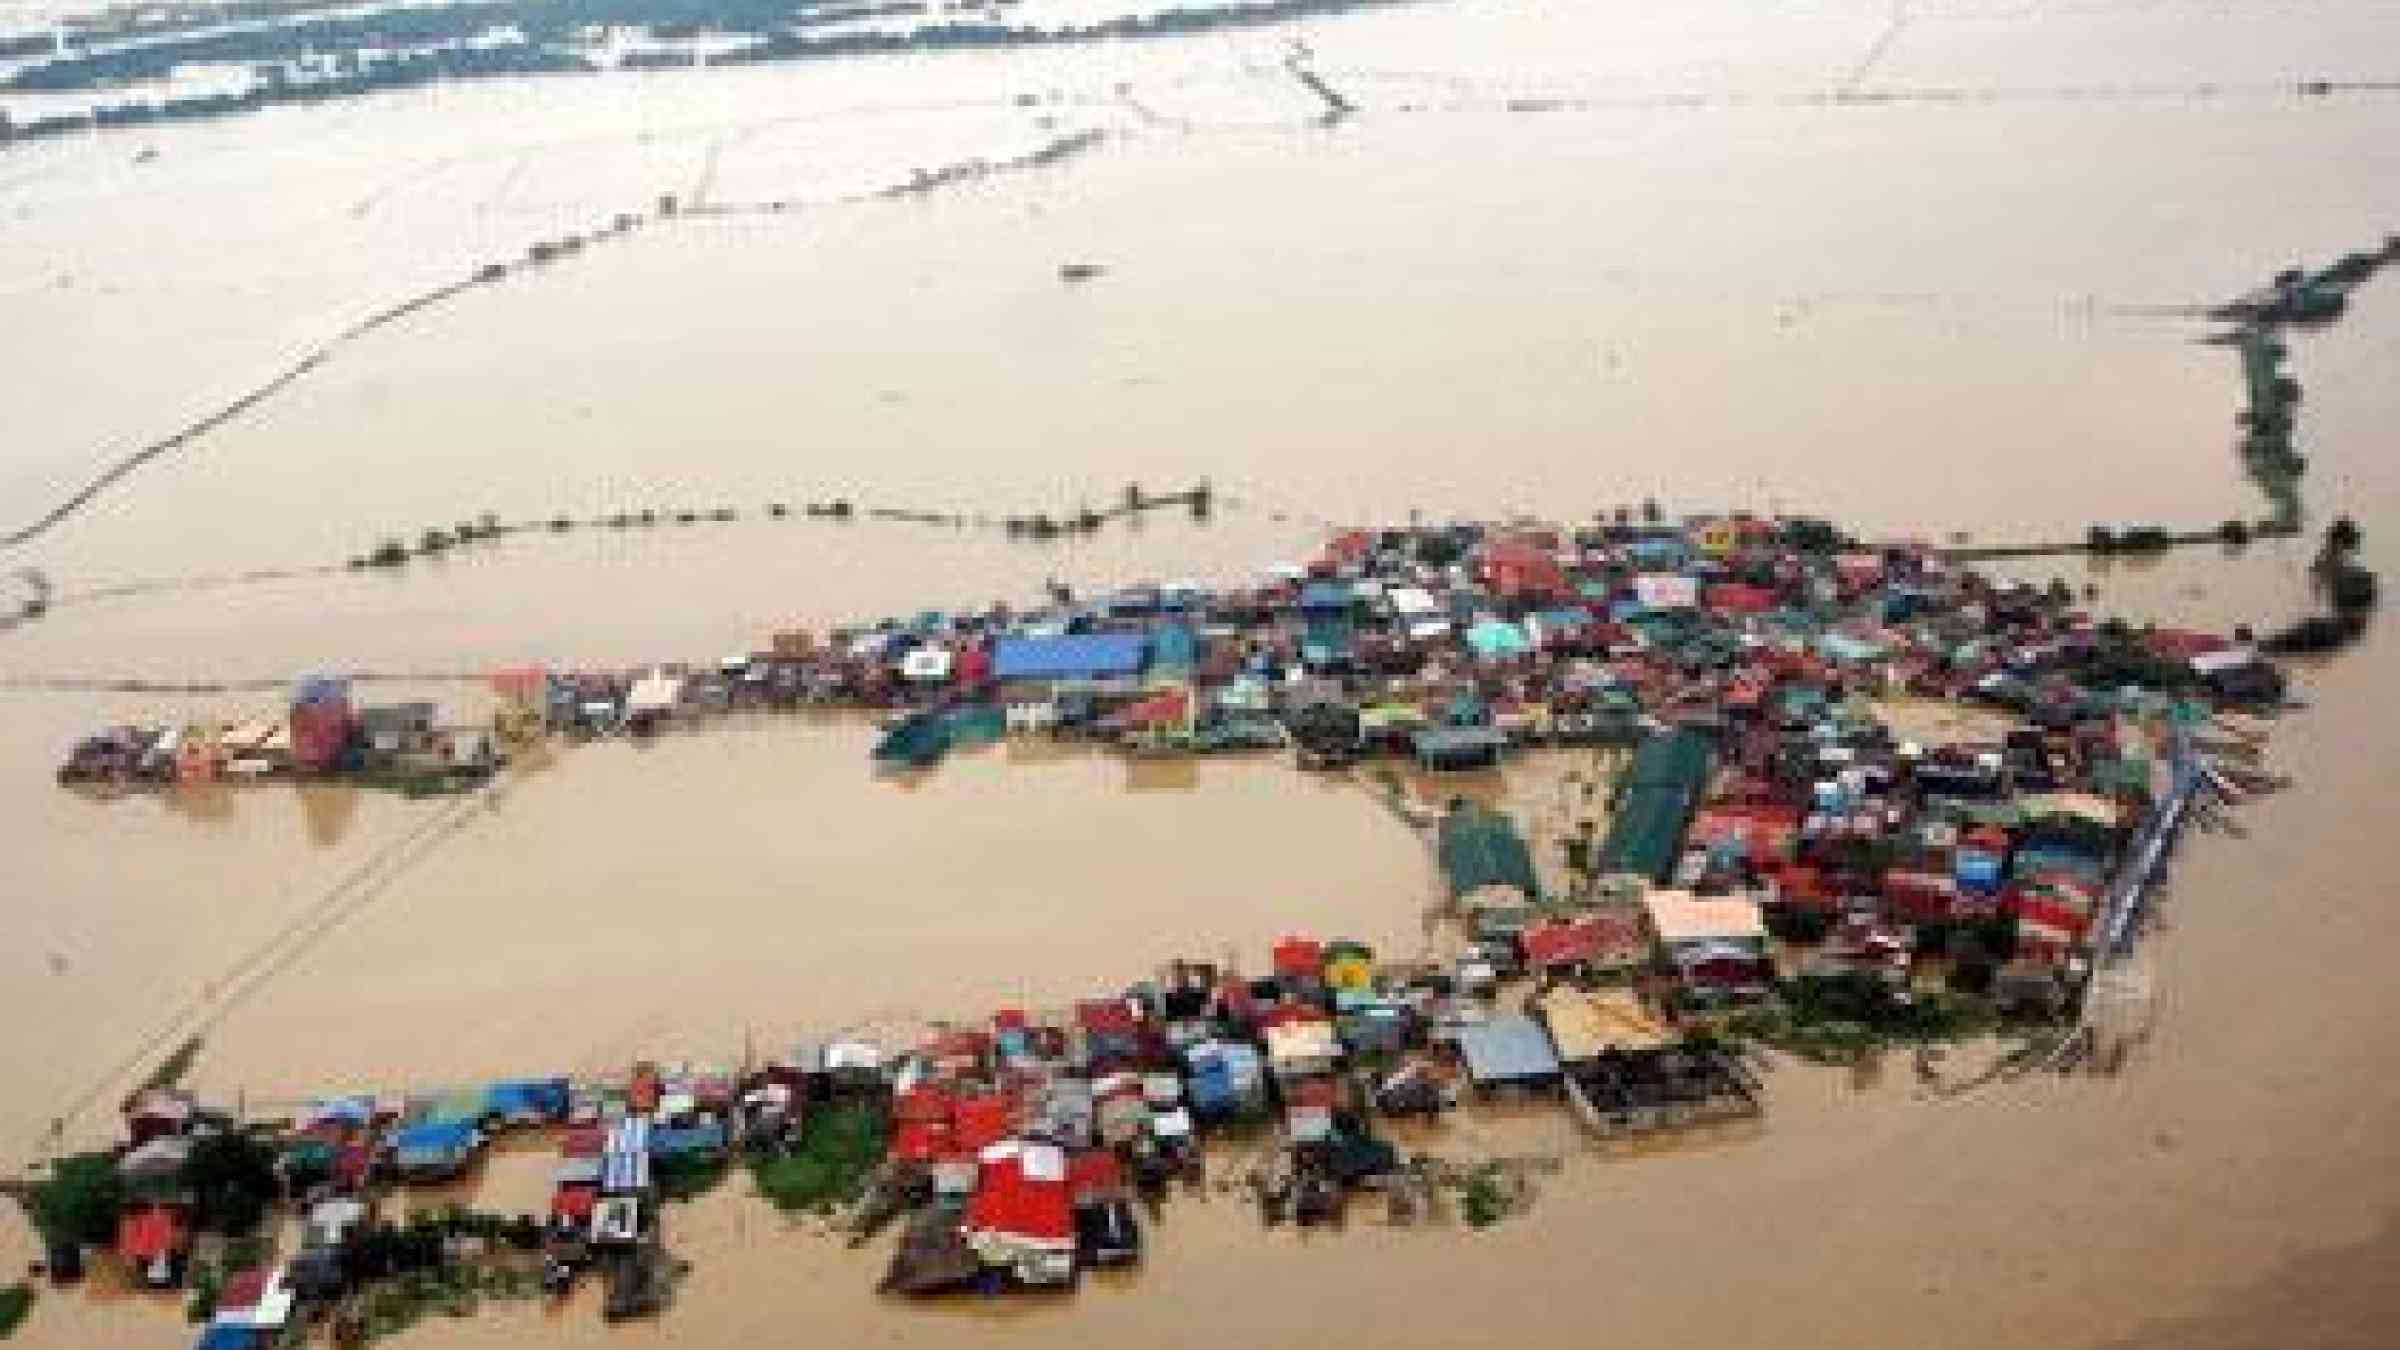 A photo released by the Department of National Defense (DND) on Aug. 8, 2012, shows damages caused by flooding around Bulacan, north of Manila, Philippines. (dnd/AFP/GettyImages)